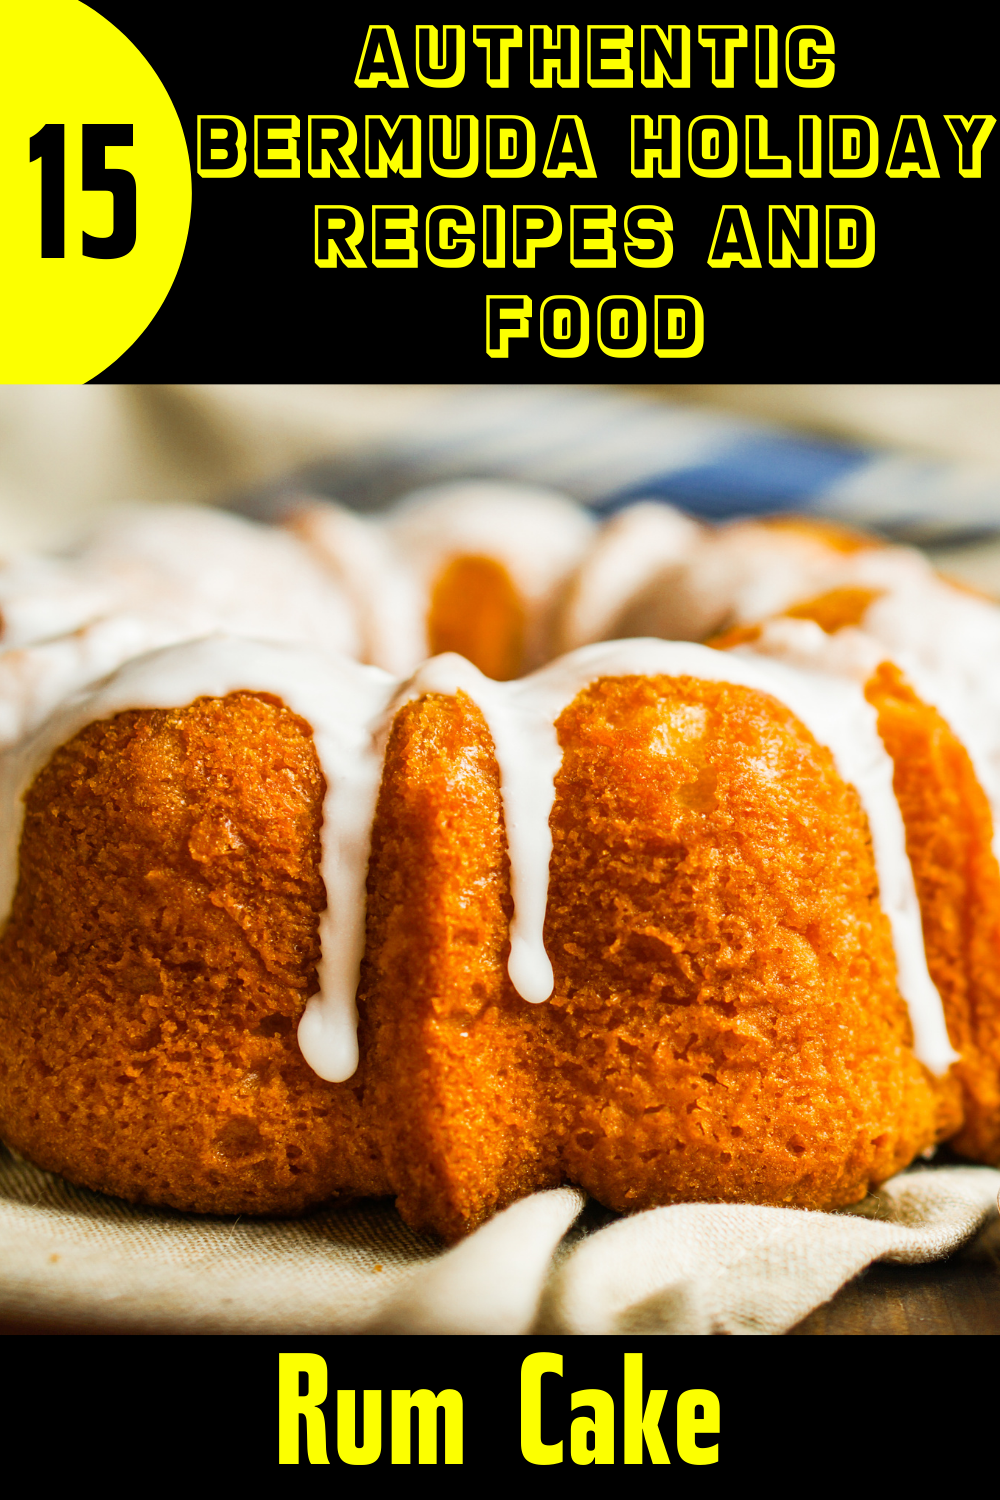 Authentic Bermuda Holiday Recipes and Food - Rum Cake